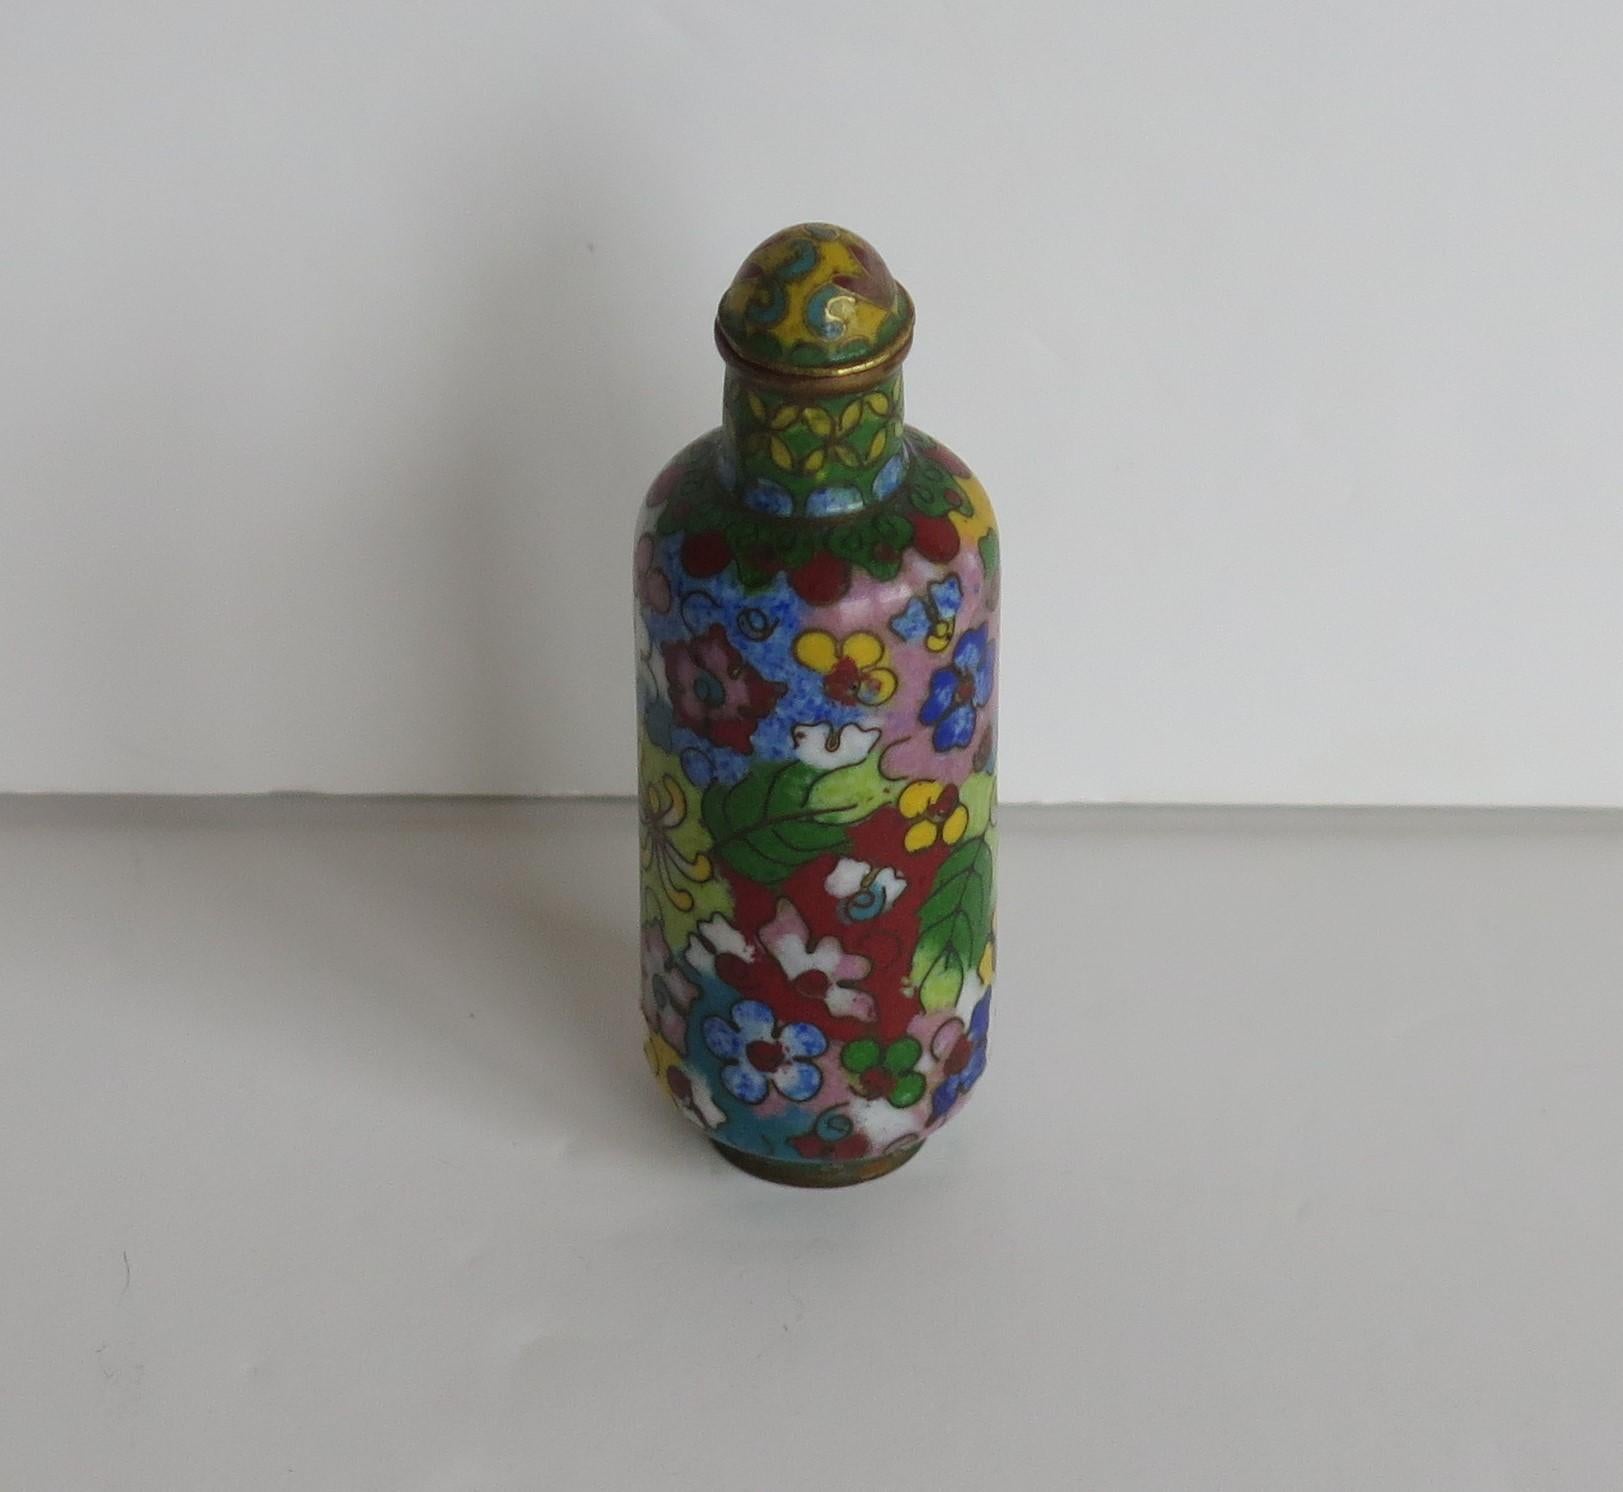 This is a very good example of a Chinese snuff bottle, made from cloisonne´ with hand enamelled decoration depicting 100 / 1000 flowers decoration, with a spoon top, all dating to the 19th Century Qing period, circa 1870. 

The bottle is